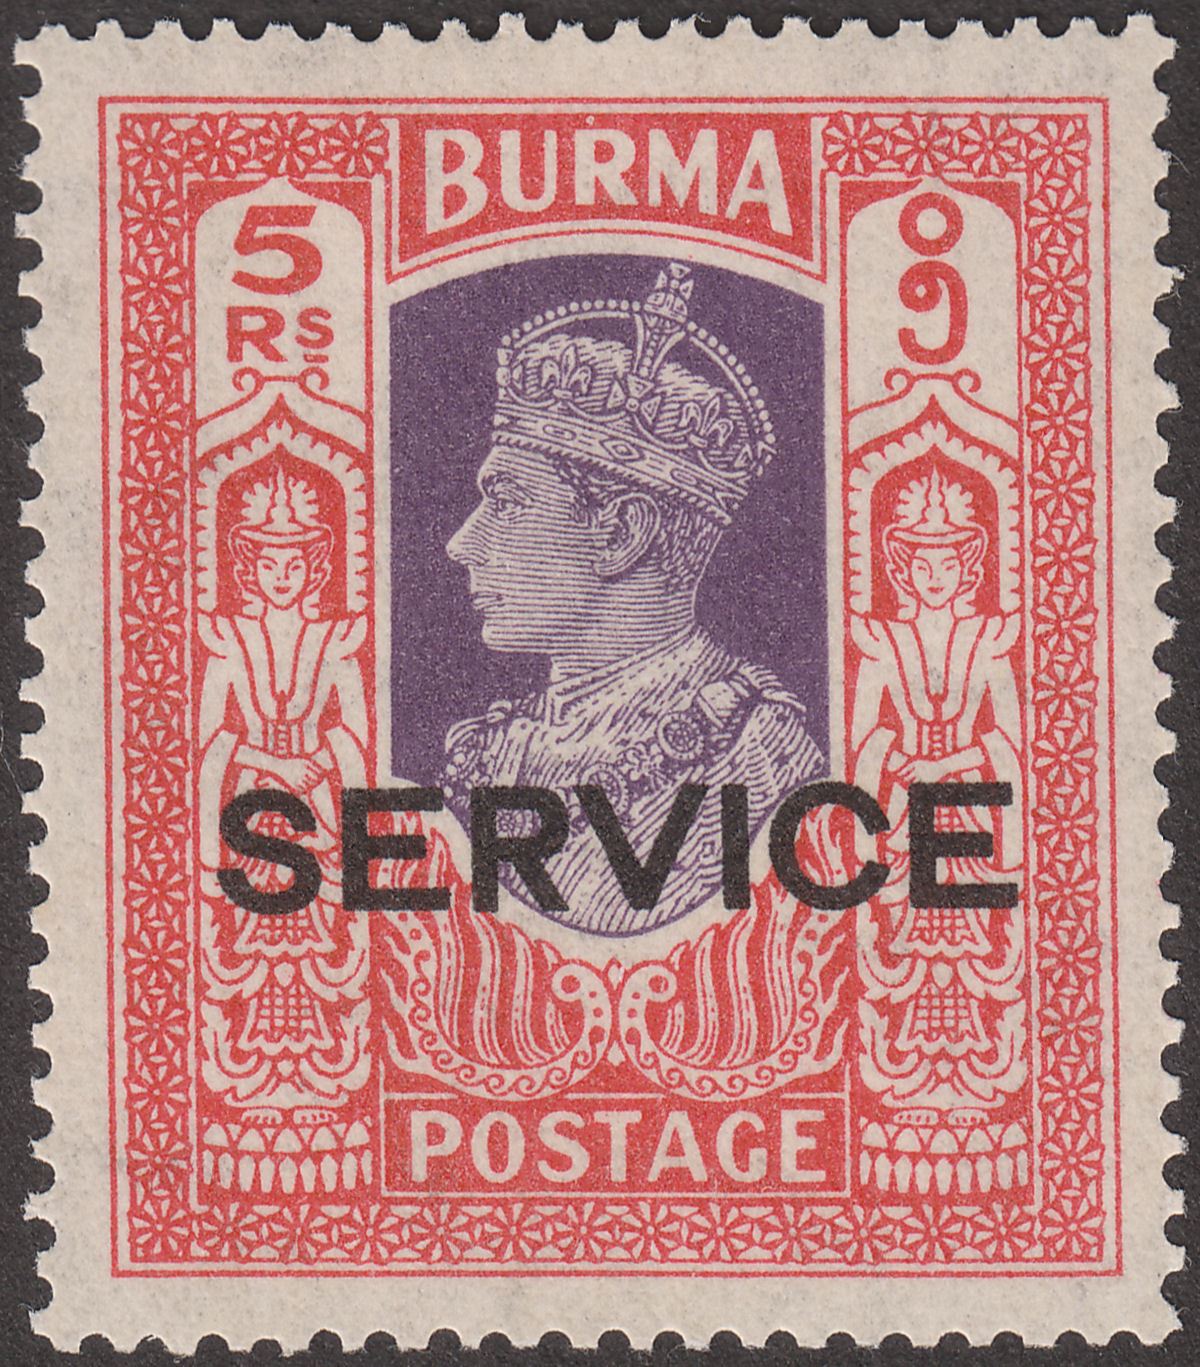 Burma 1939 KGVI Official Service Opt 5r Violet and Scarlet Mint SG O26 cat £26